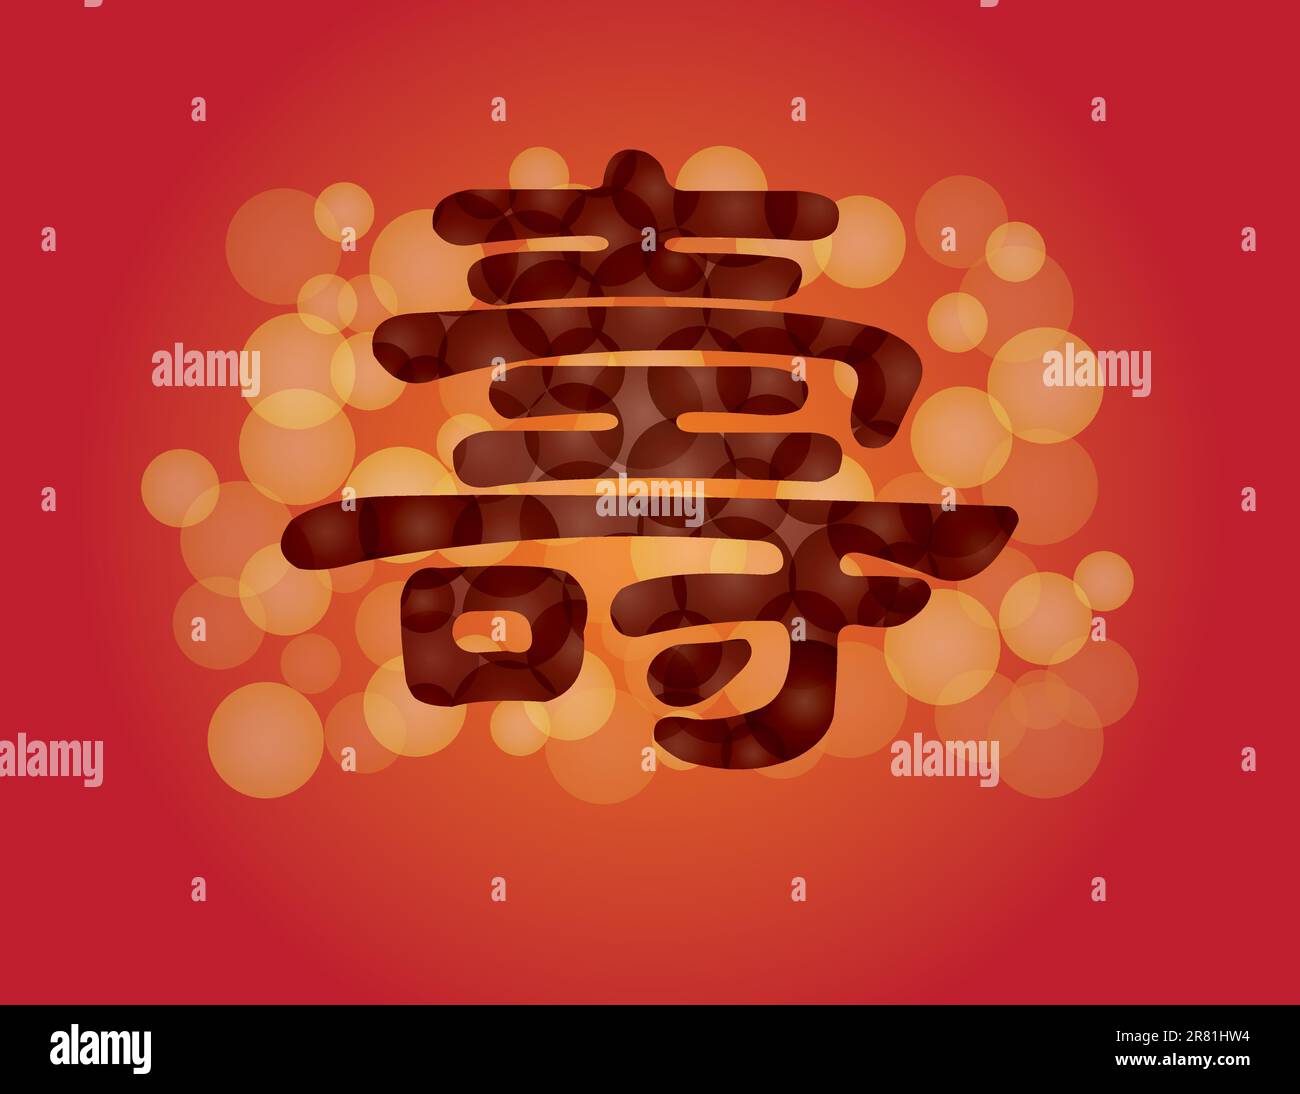 Chinese Longevity Text Symbol with Eternity Circle Pattern Illustration Stock Vector